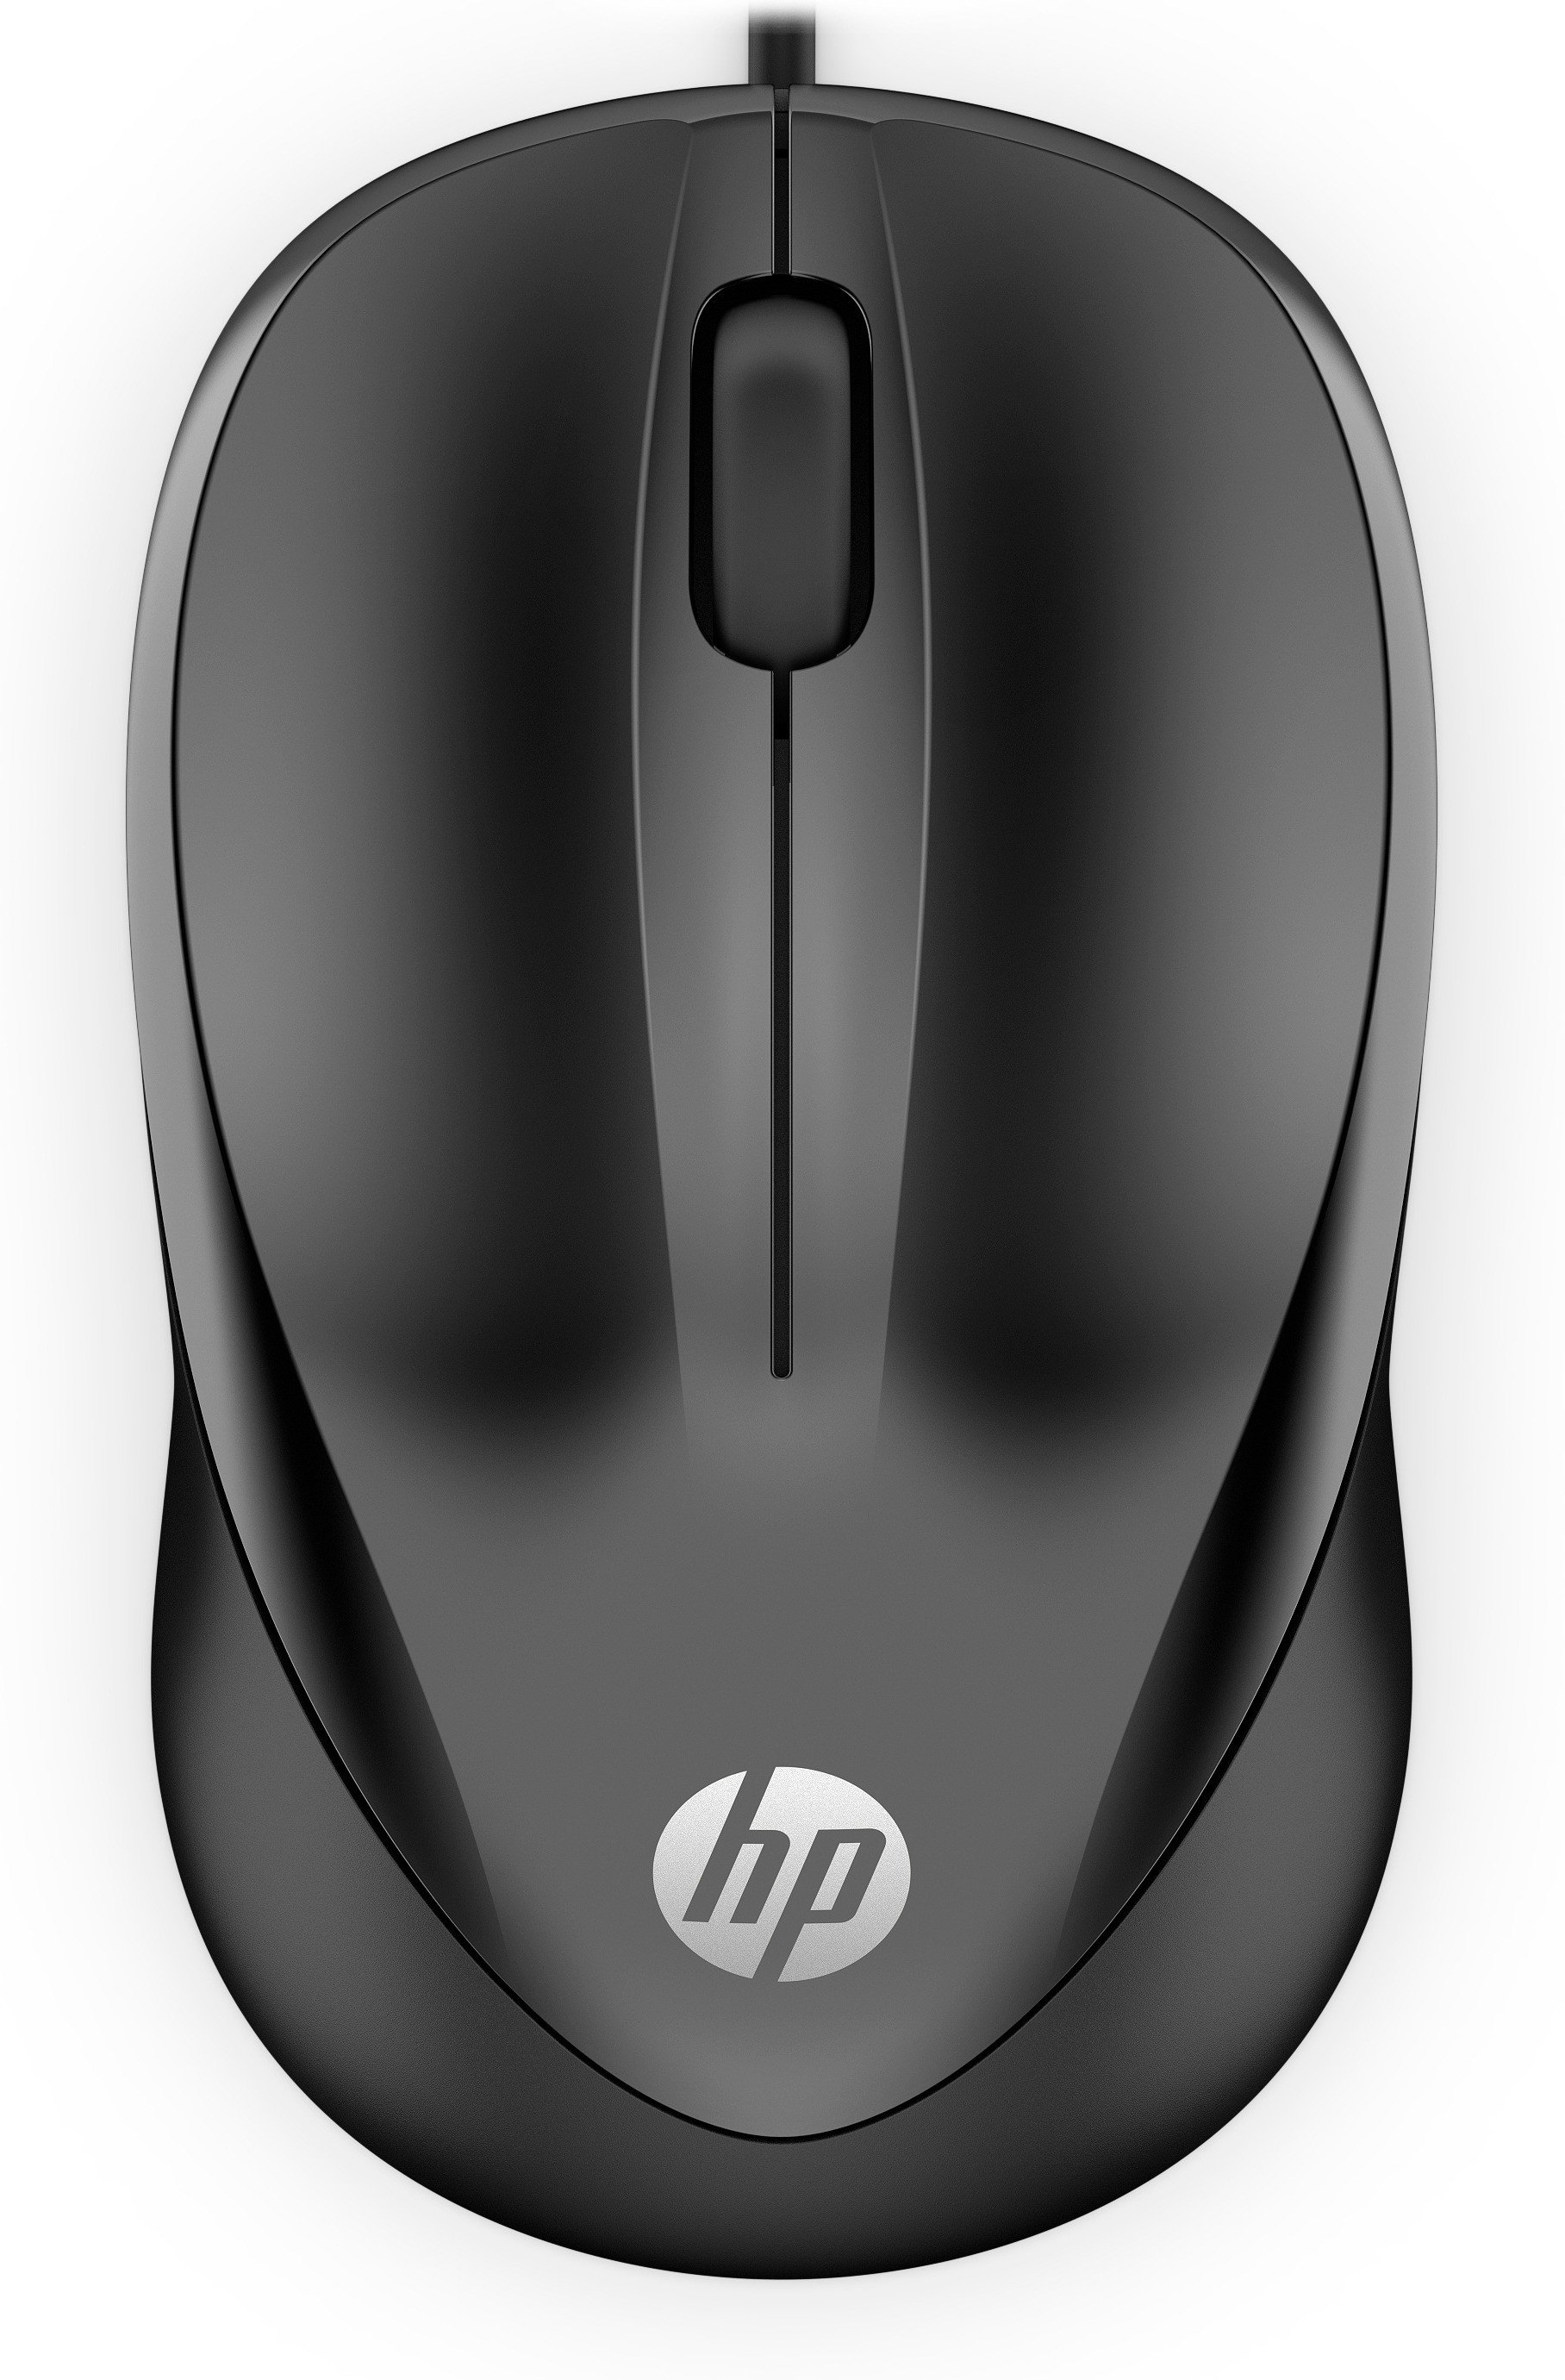 HP Wired Mouse 1000 Muis Zwart